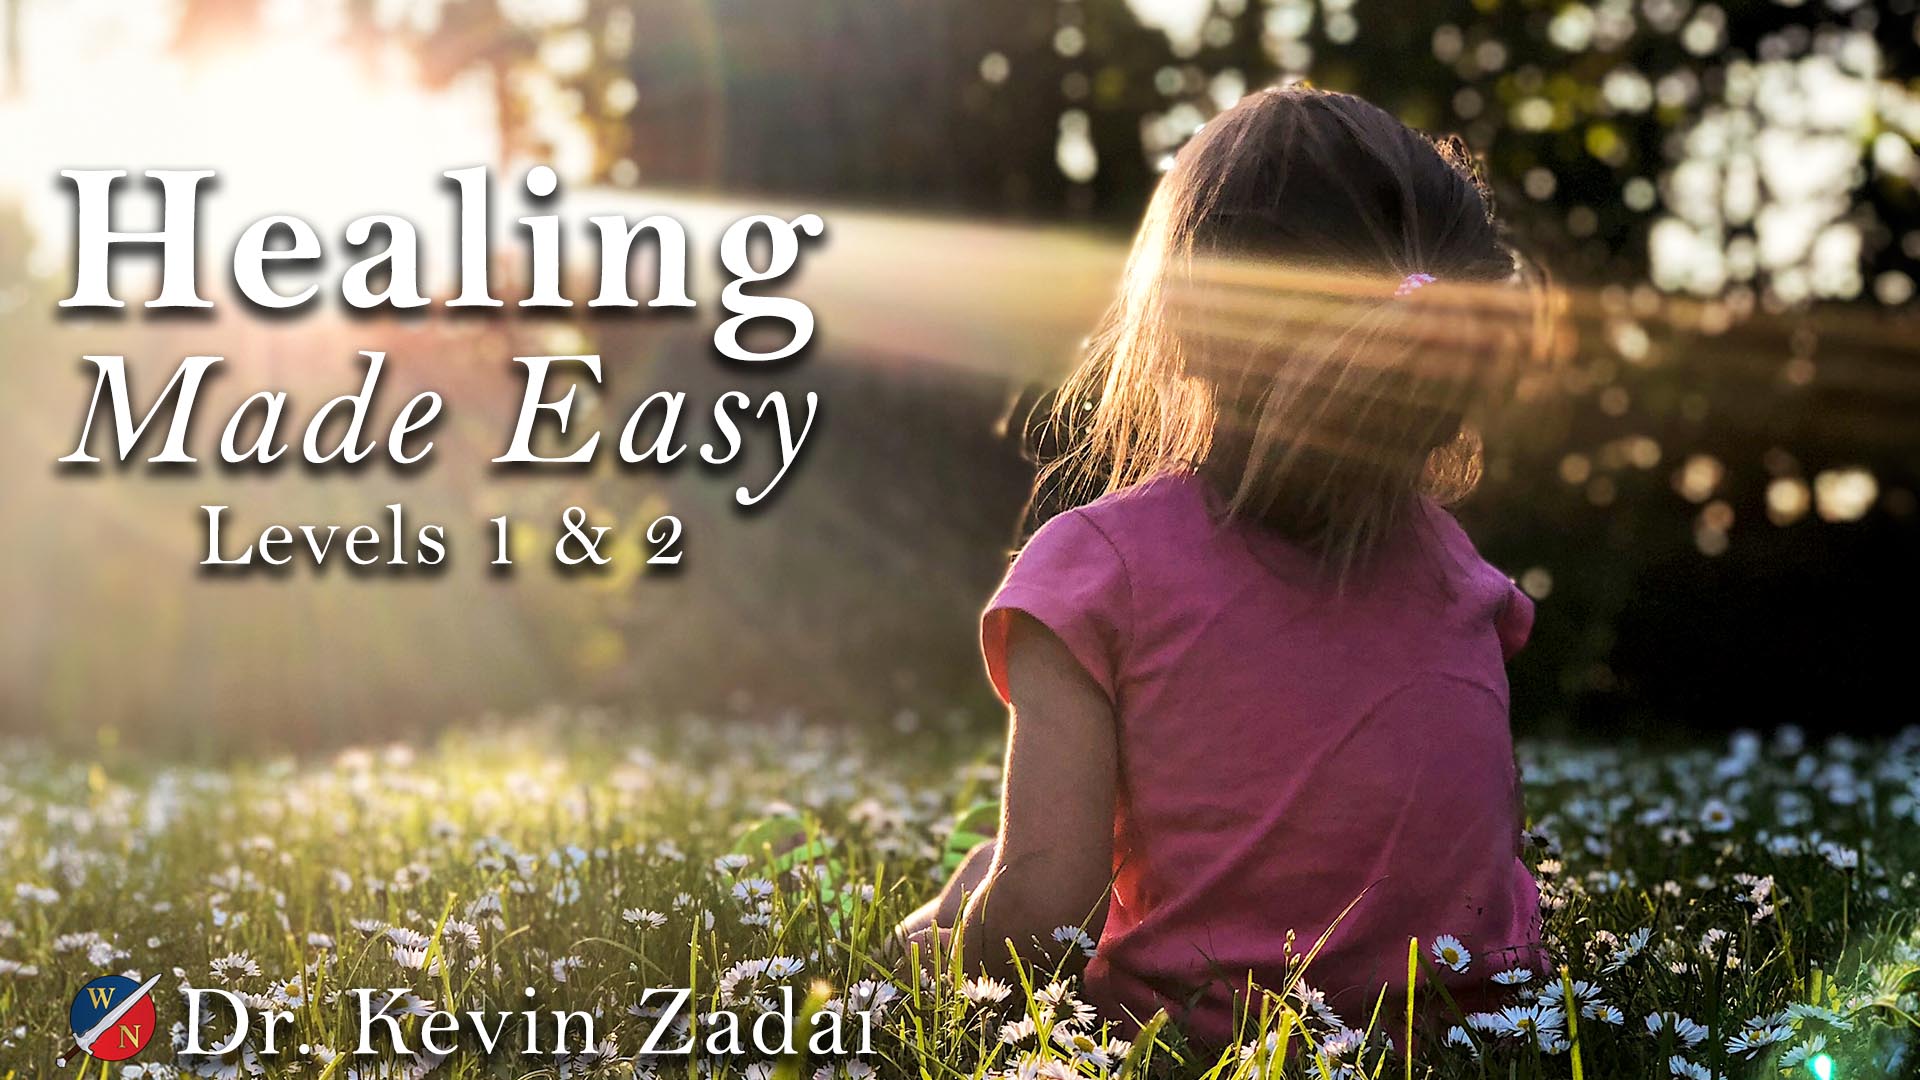 Healing Made Easy by Dr. Kevin Zadai